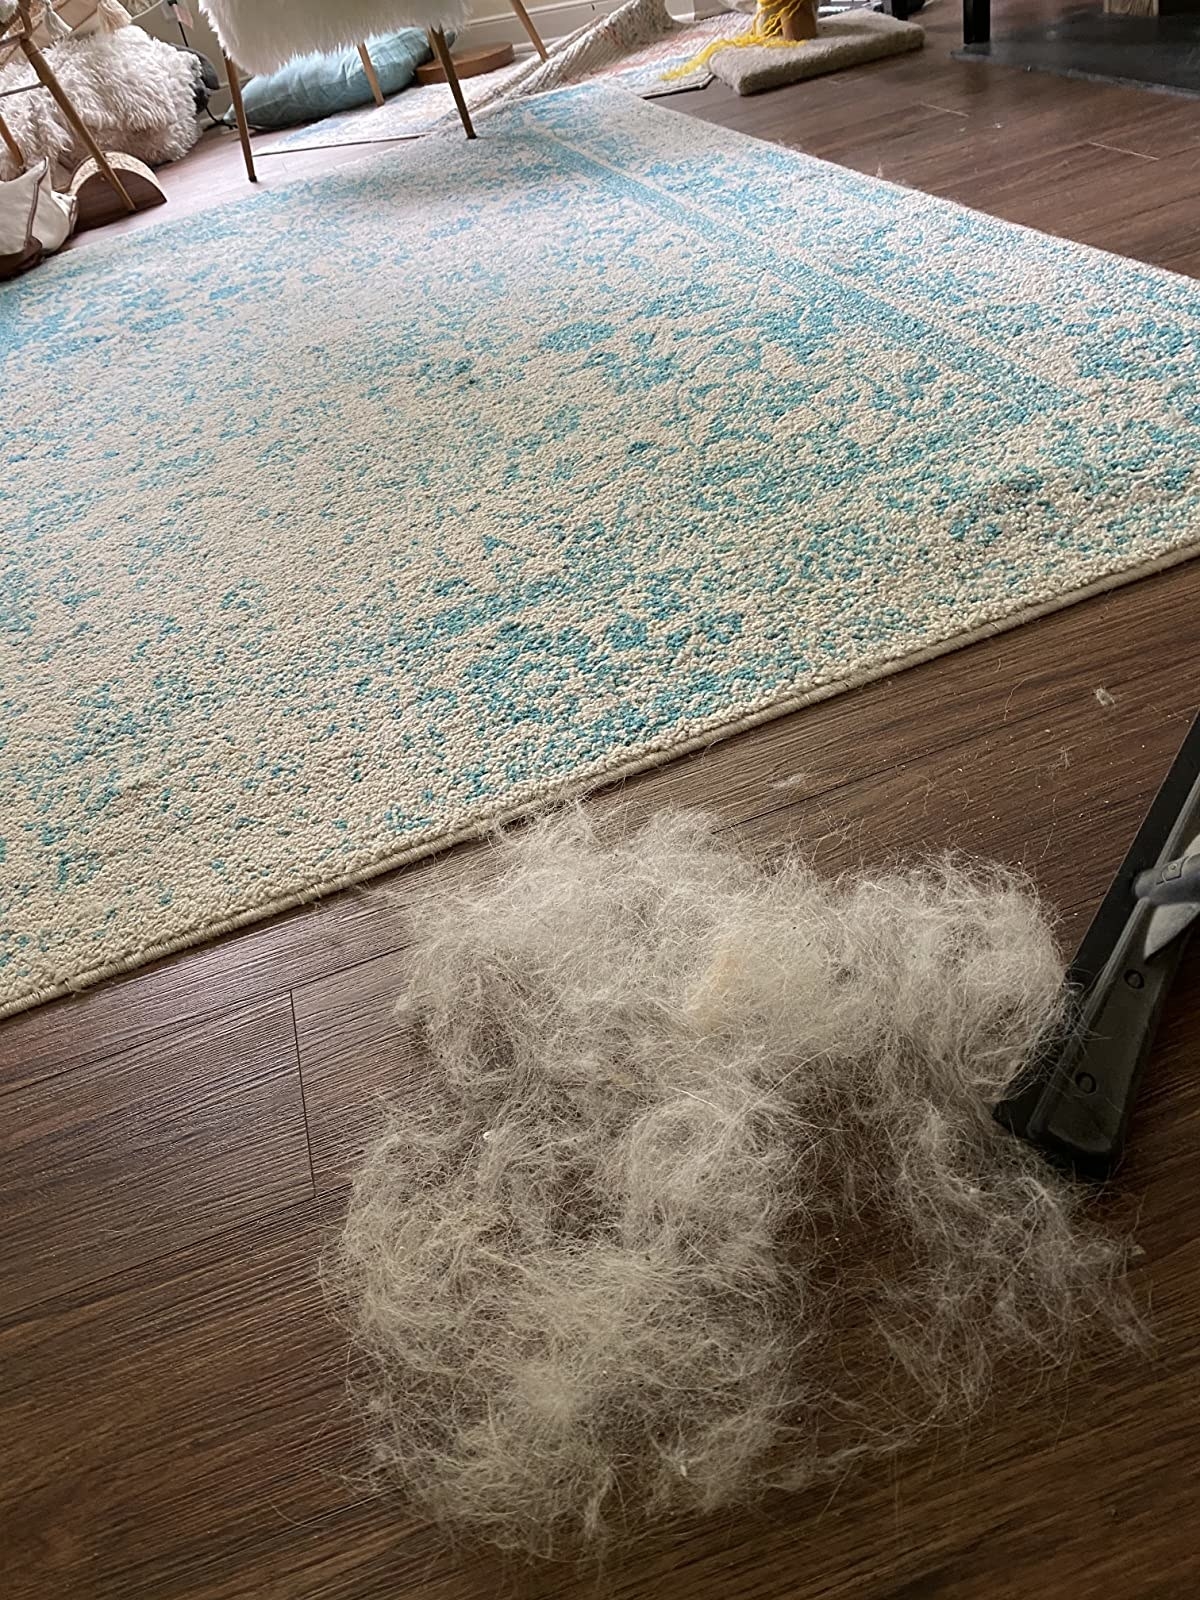 Reviewer using the squeegee brush to clean pet hair off of their carpet